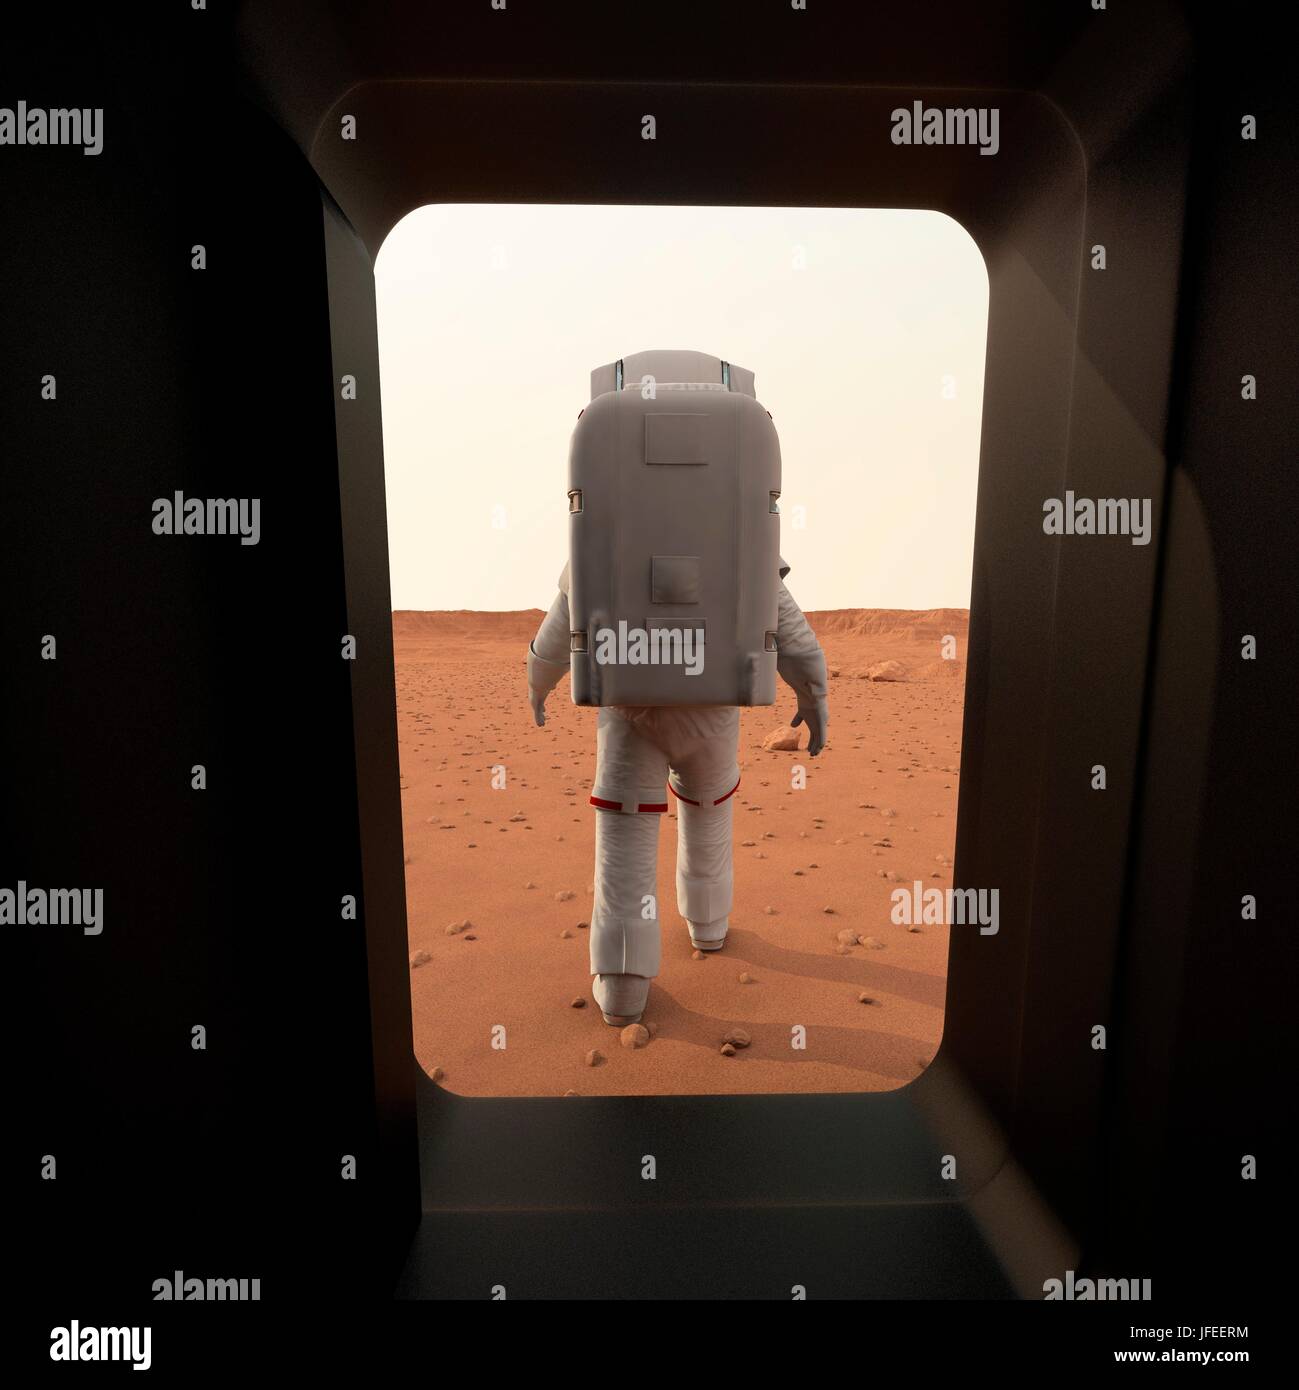 Astronaut leaving space ship and walking on planet, illustration. Stock Photo